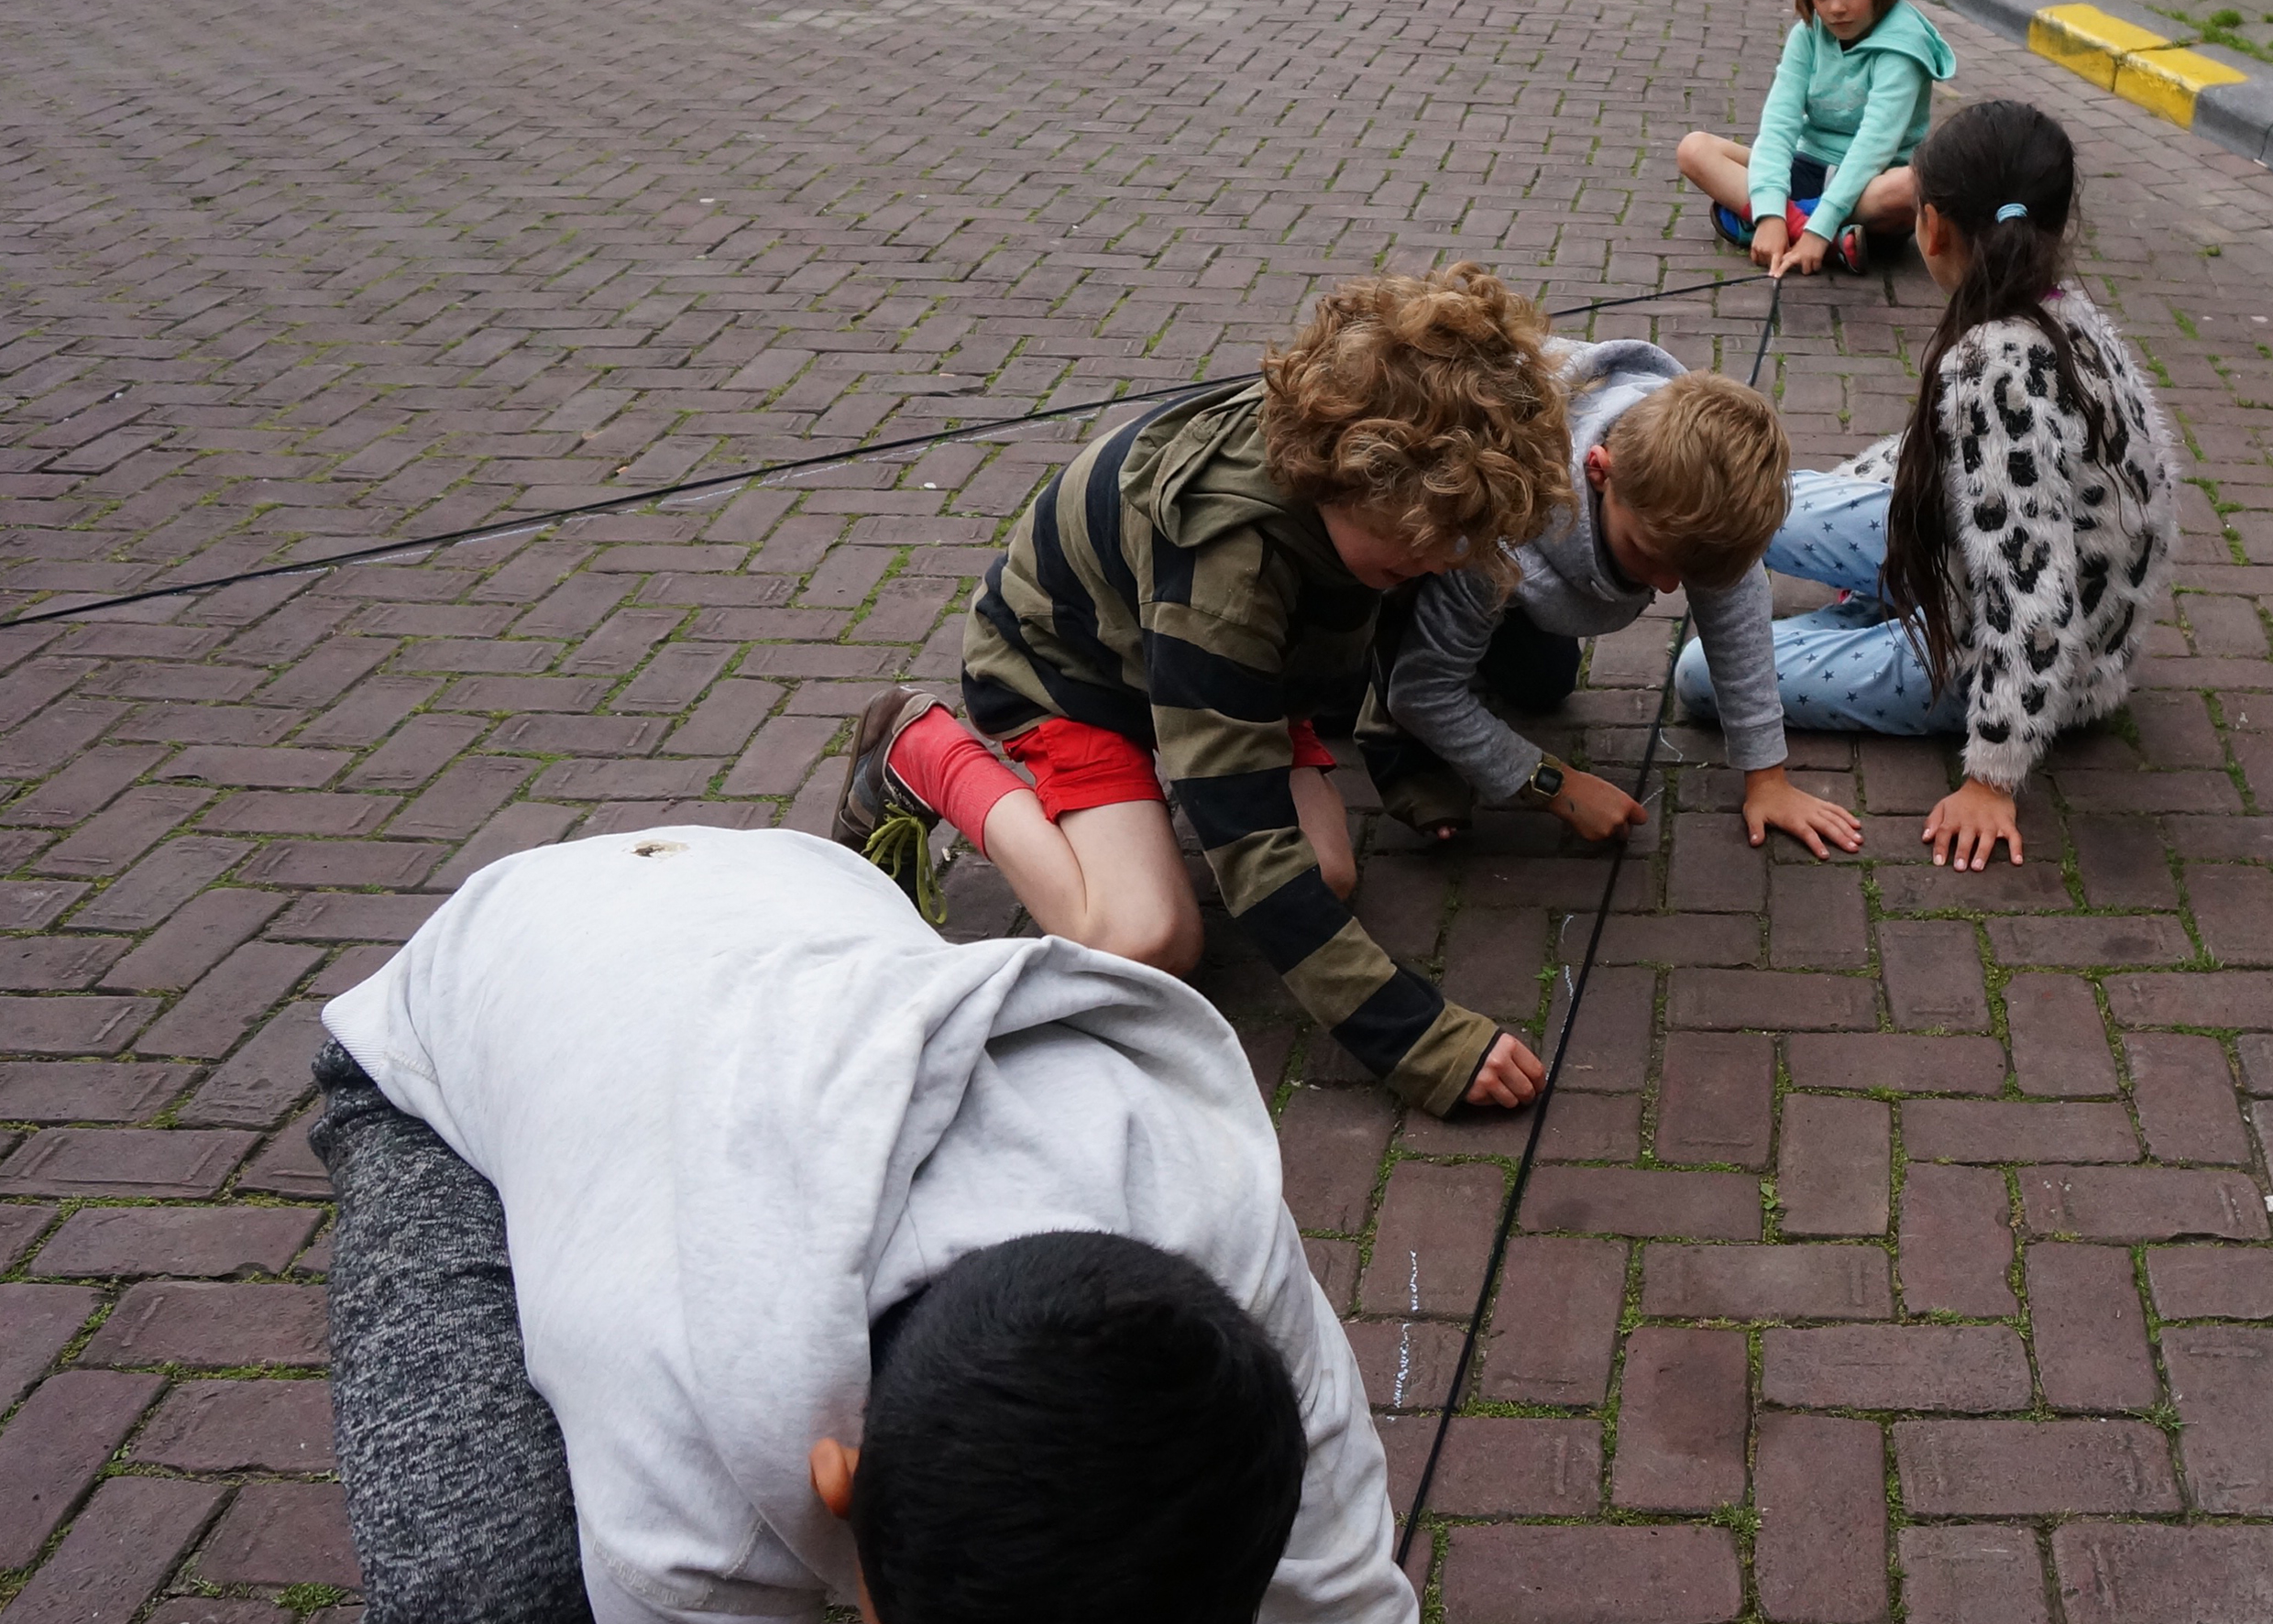 Children drawing on the ground during a workshop